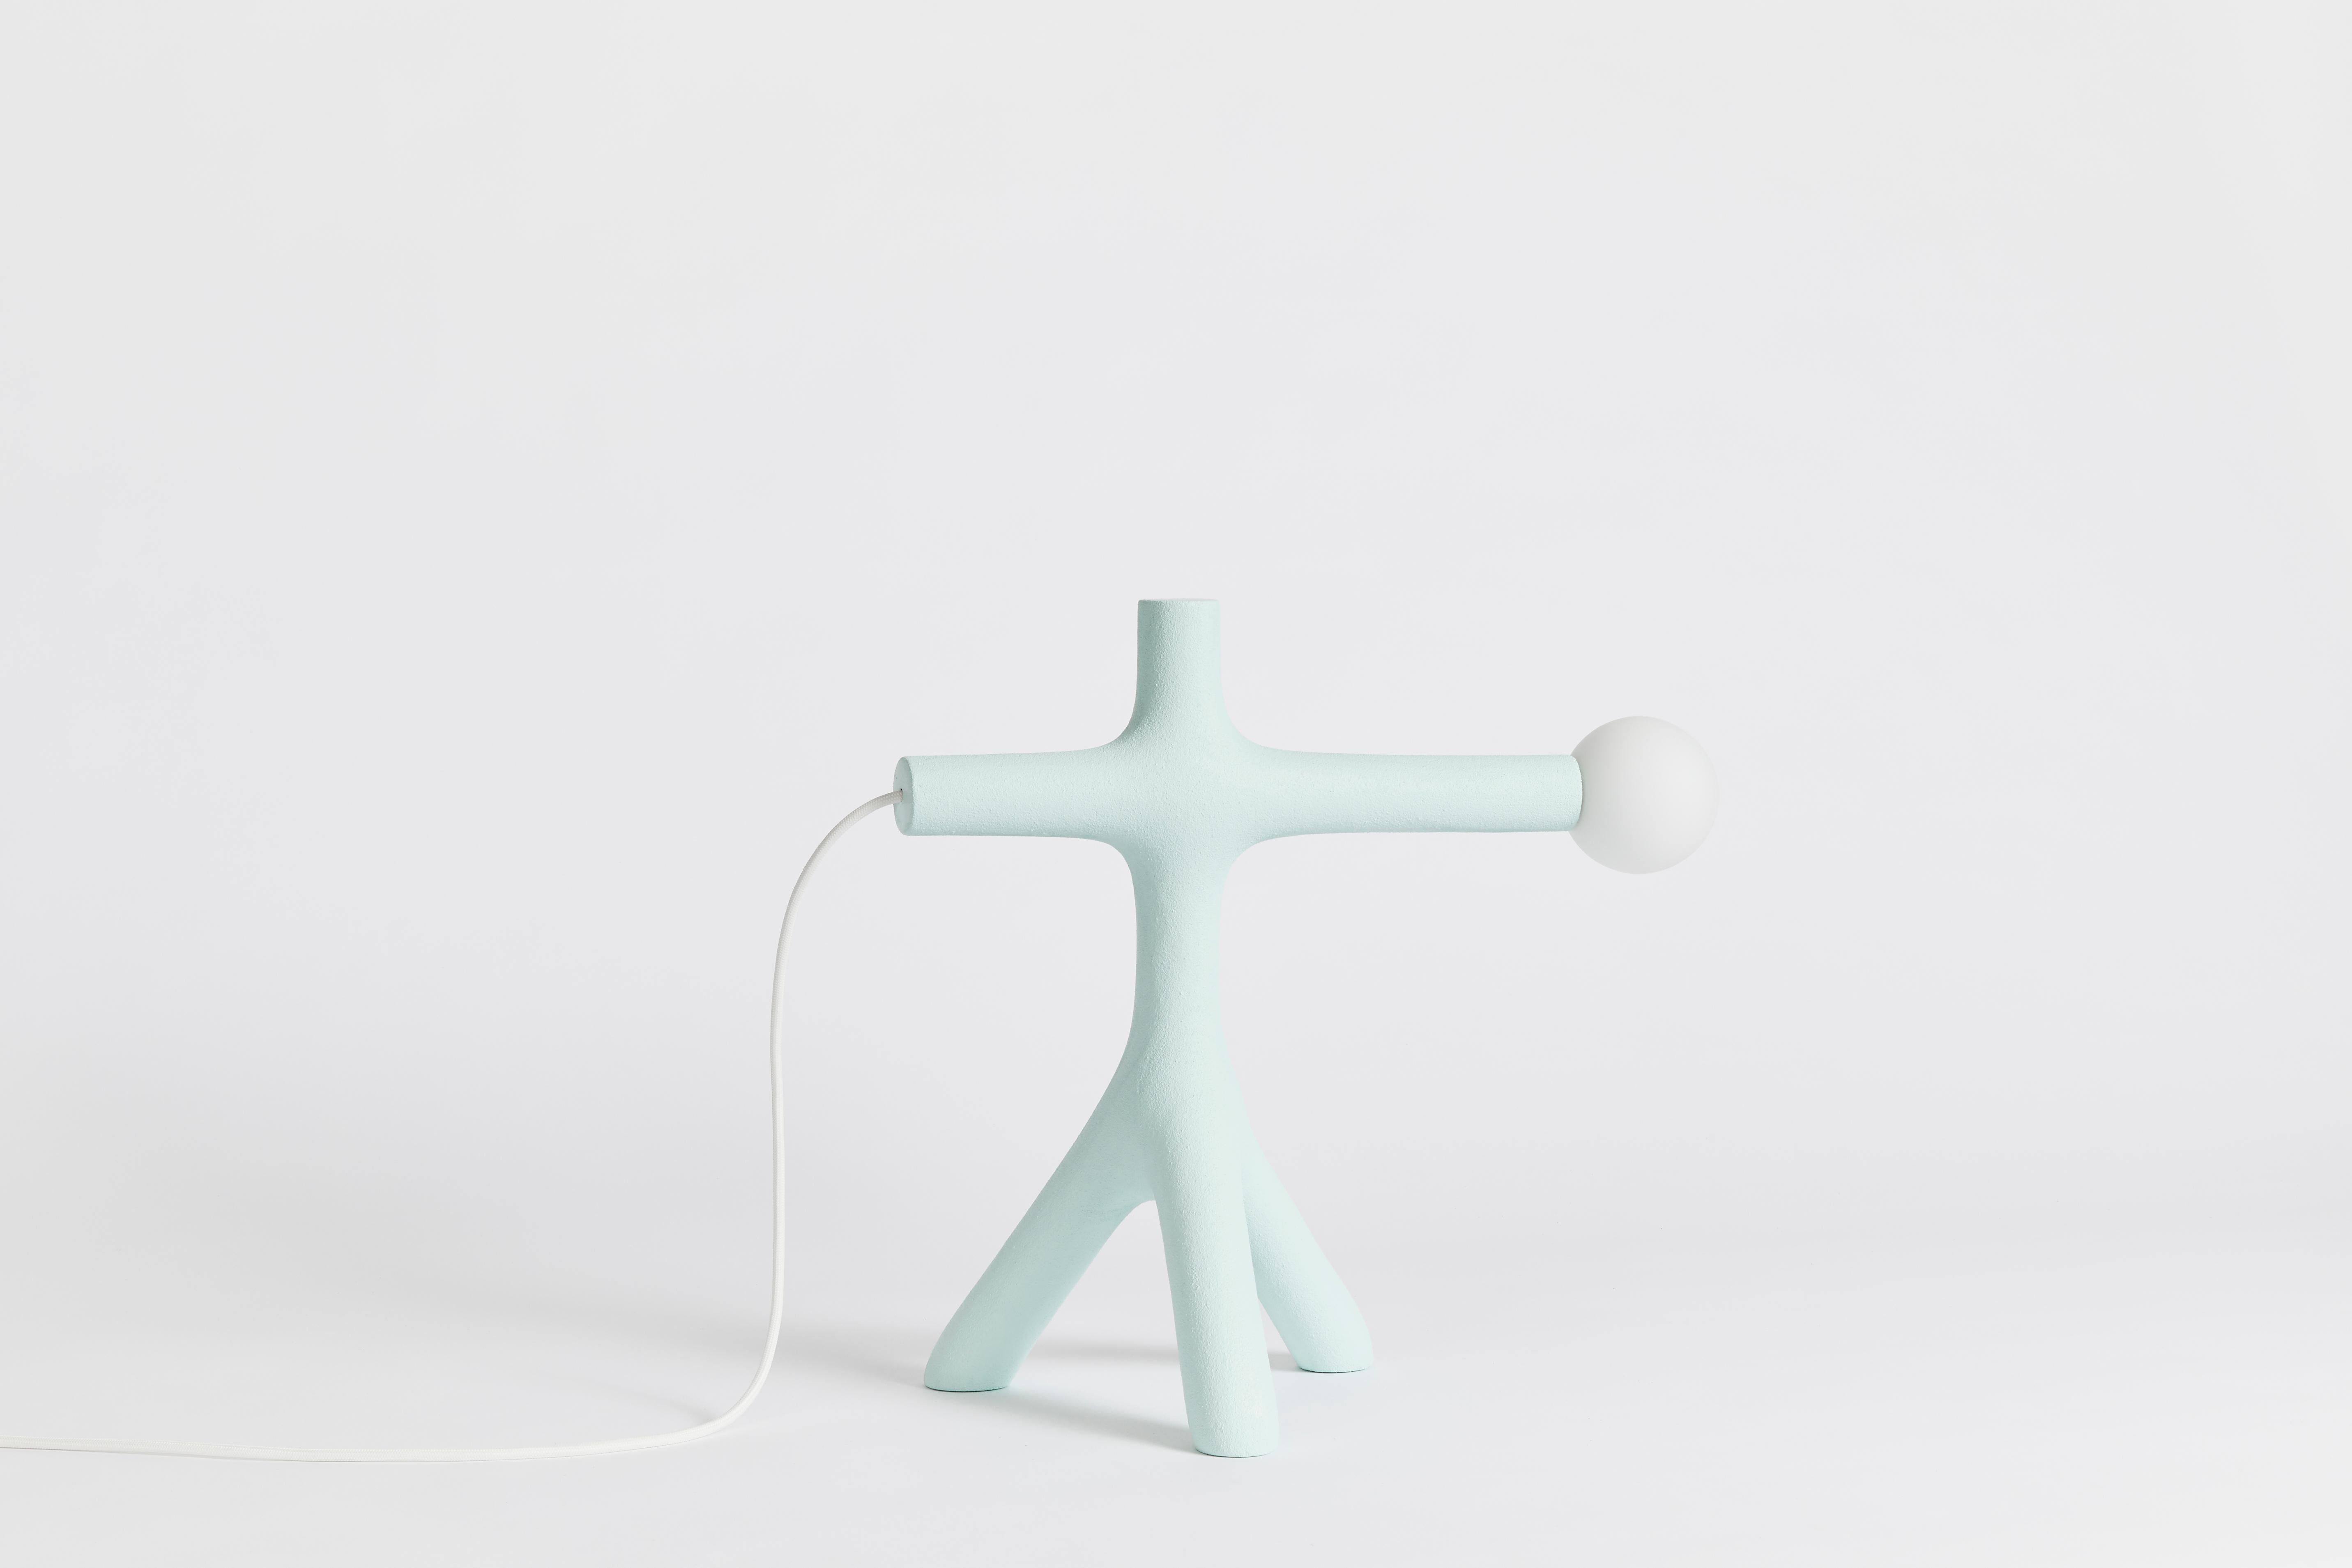 Play object desk light 03 by HWE
Limited edition
Materials: Waste SLS 3D nylon powder, Sand from sustainable sources
Dimensions: H 45 x W 47 x D 25 cm 
Colour: Anthracite, aqua, cream, lemon, pink and grey
Finish: Matte, sealed surface

All